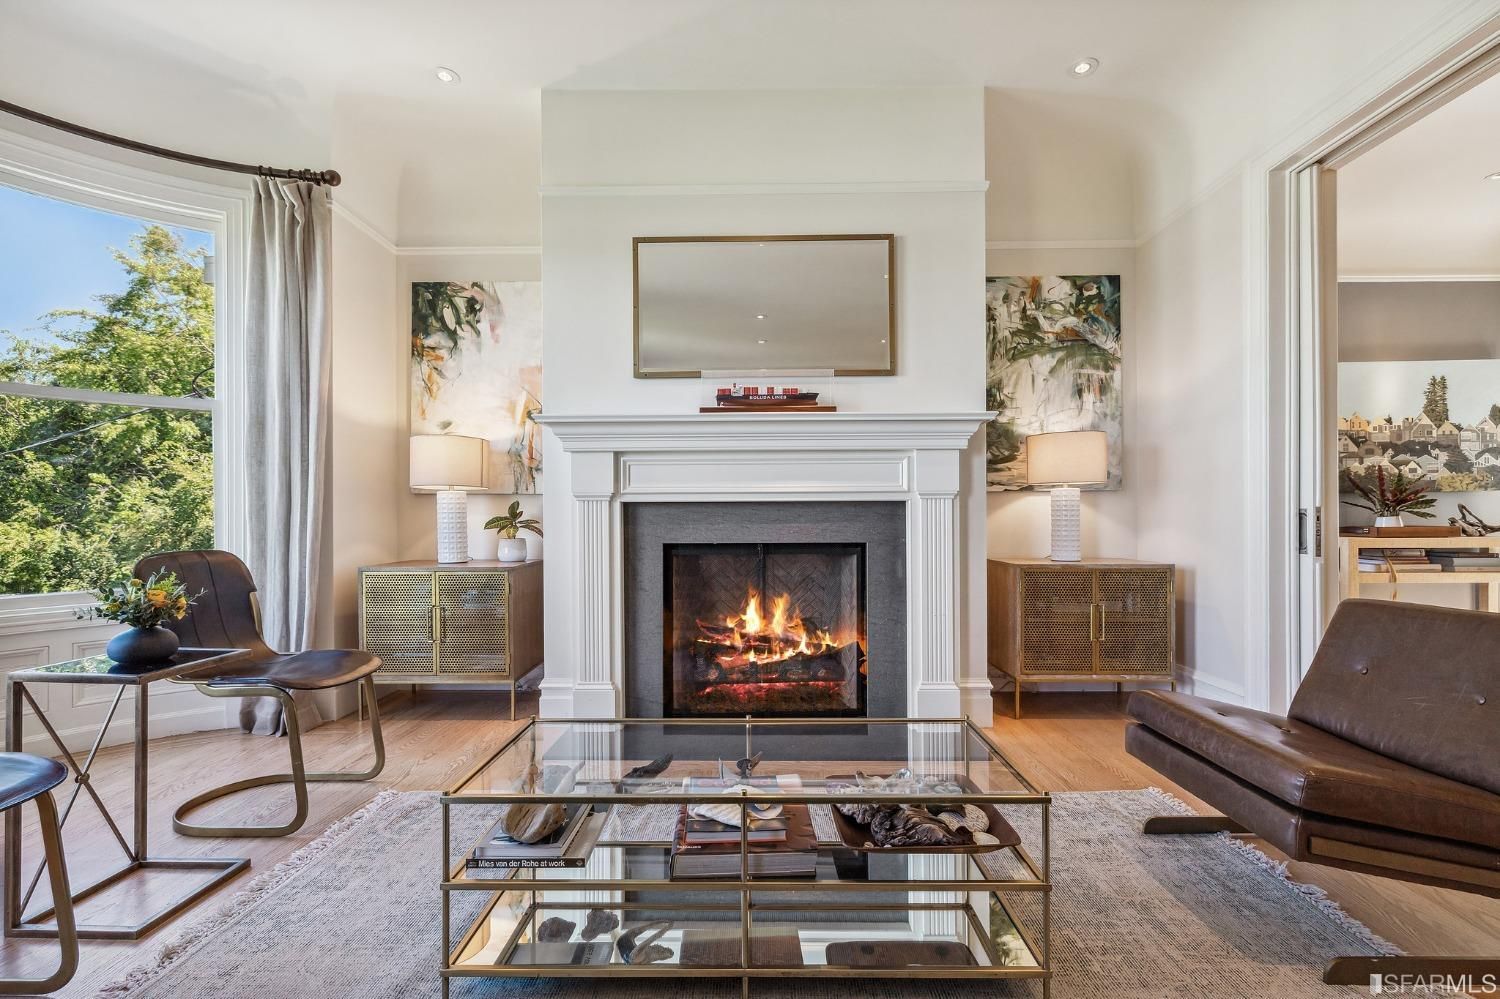 Property Photo: Living room with fireplace and wood mantle, as seen at 286 Fair Oaks St, purchased via John DiDomenico